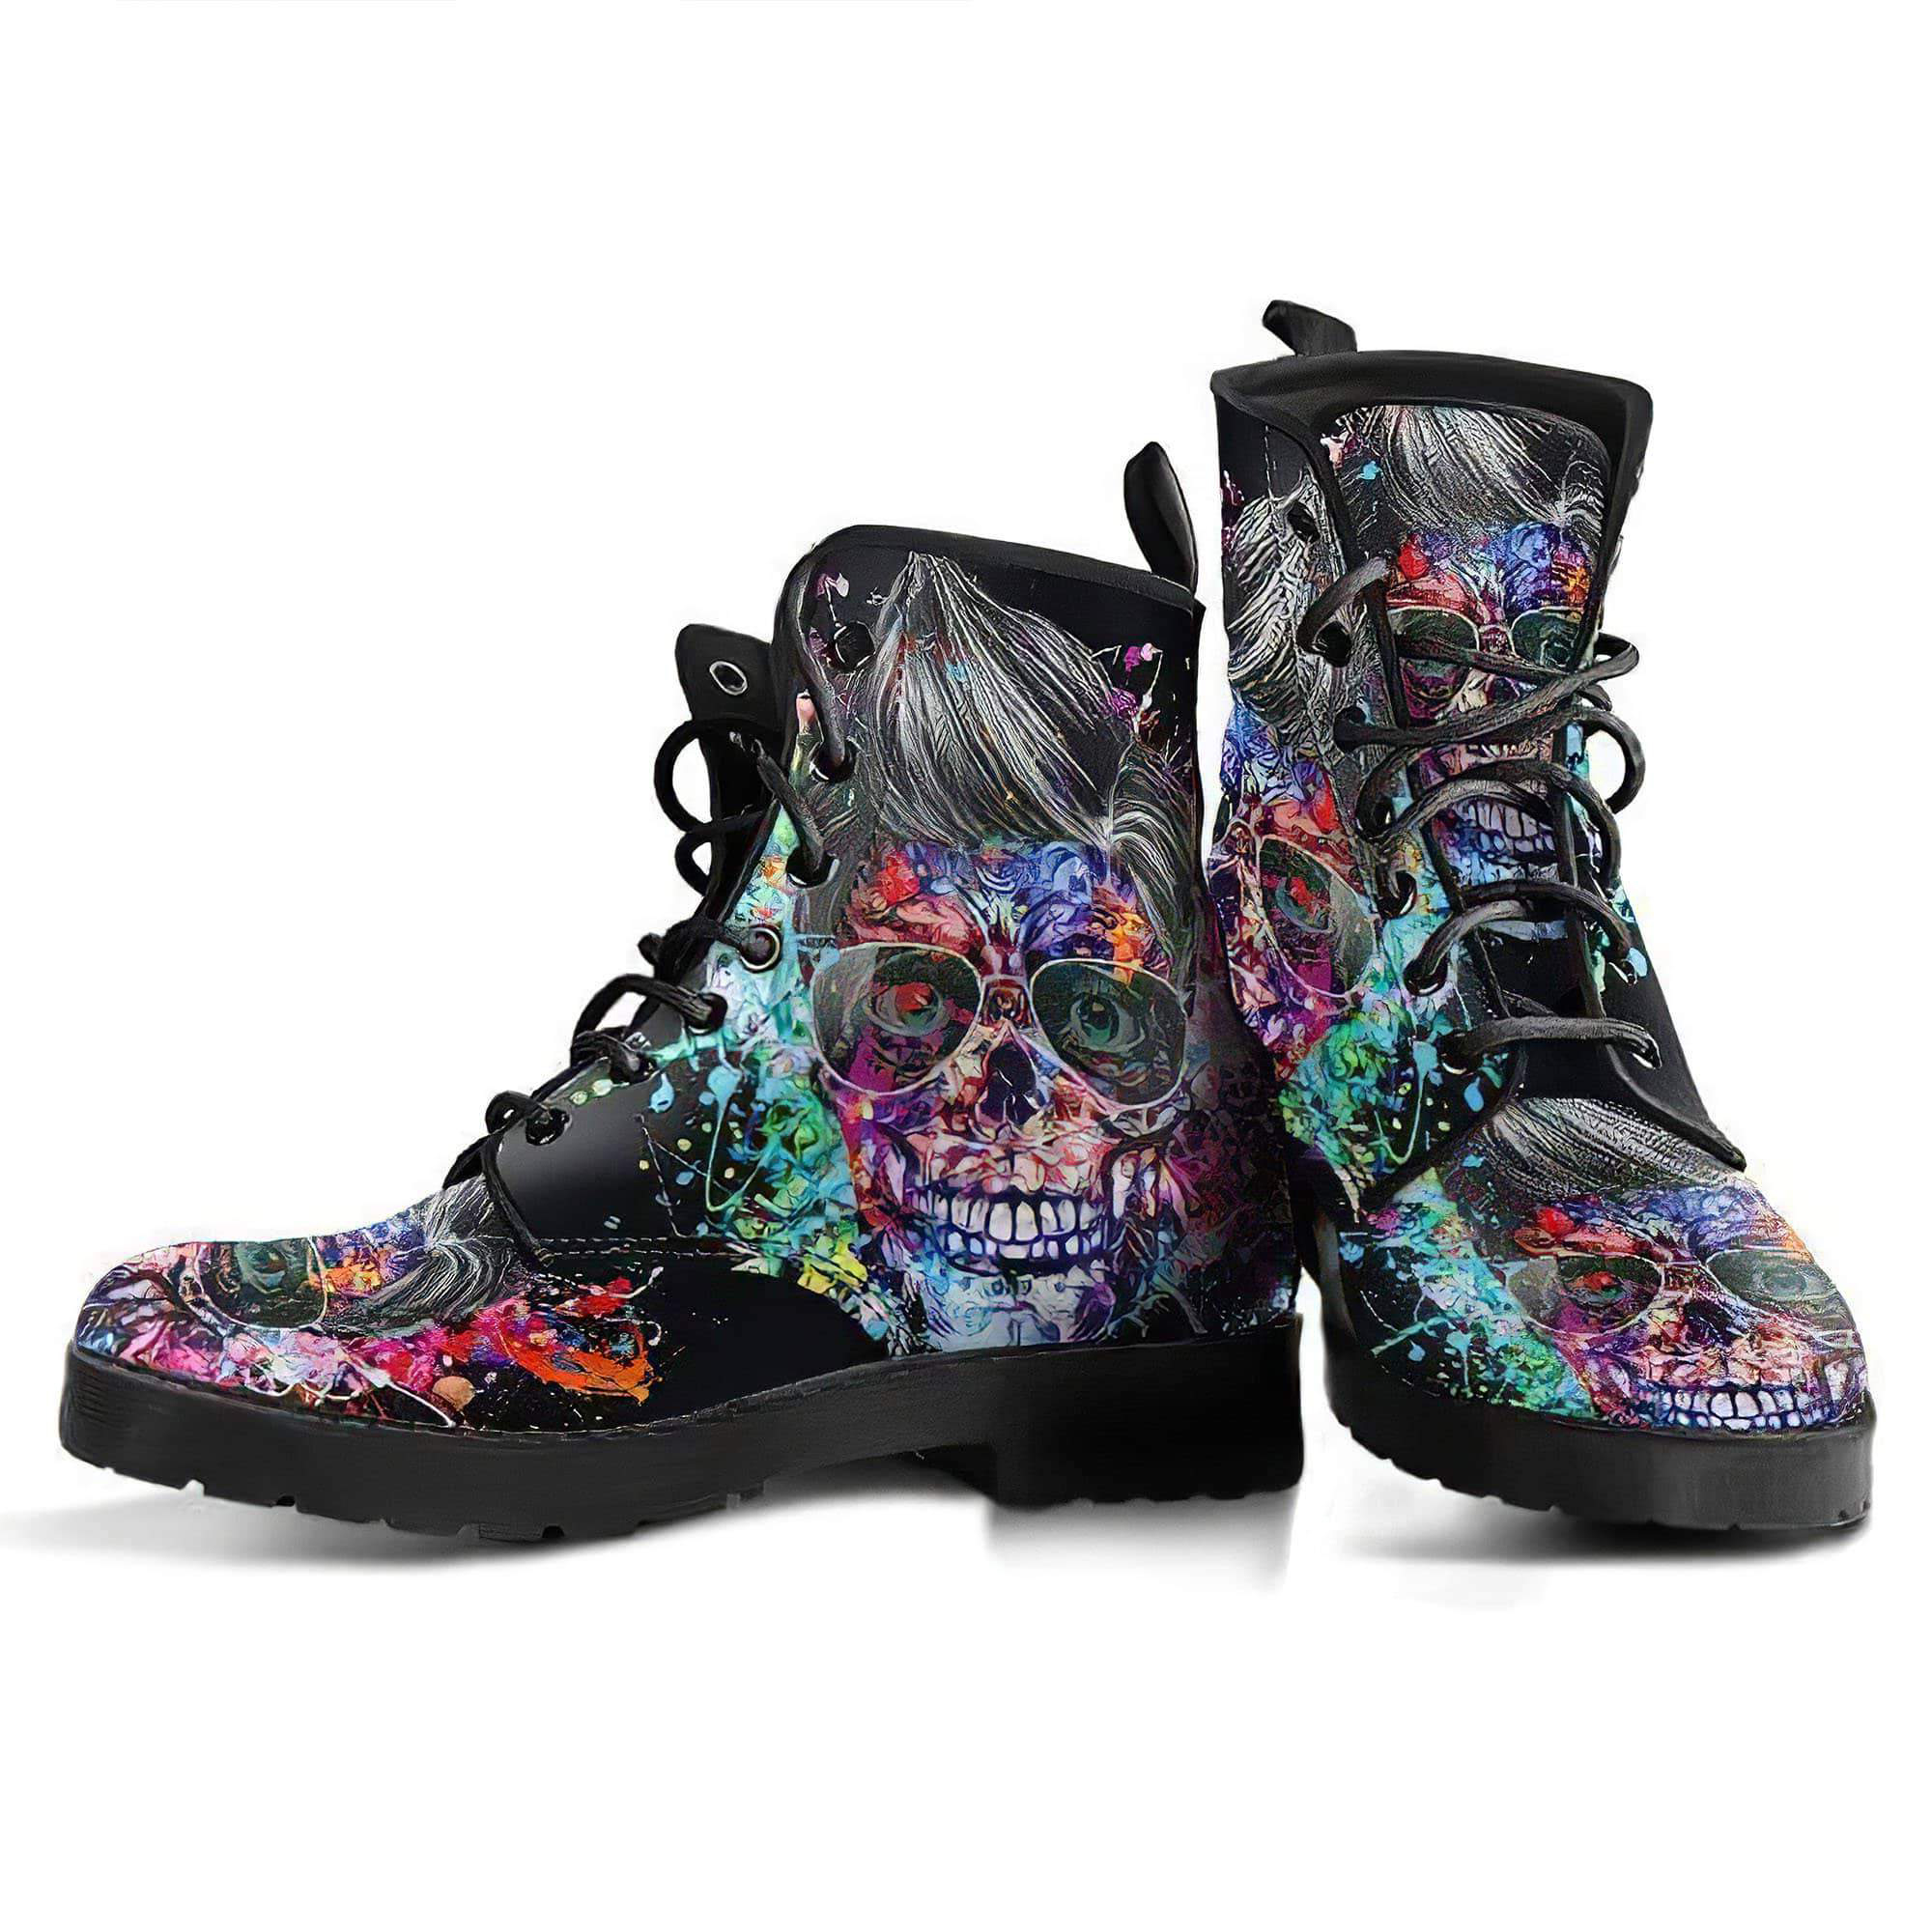 skull-1-handcrafted-boots-women-s-leather-boots-12051947749437.jpg